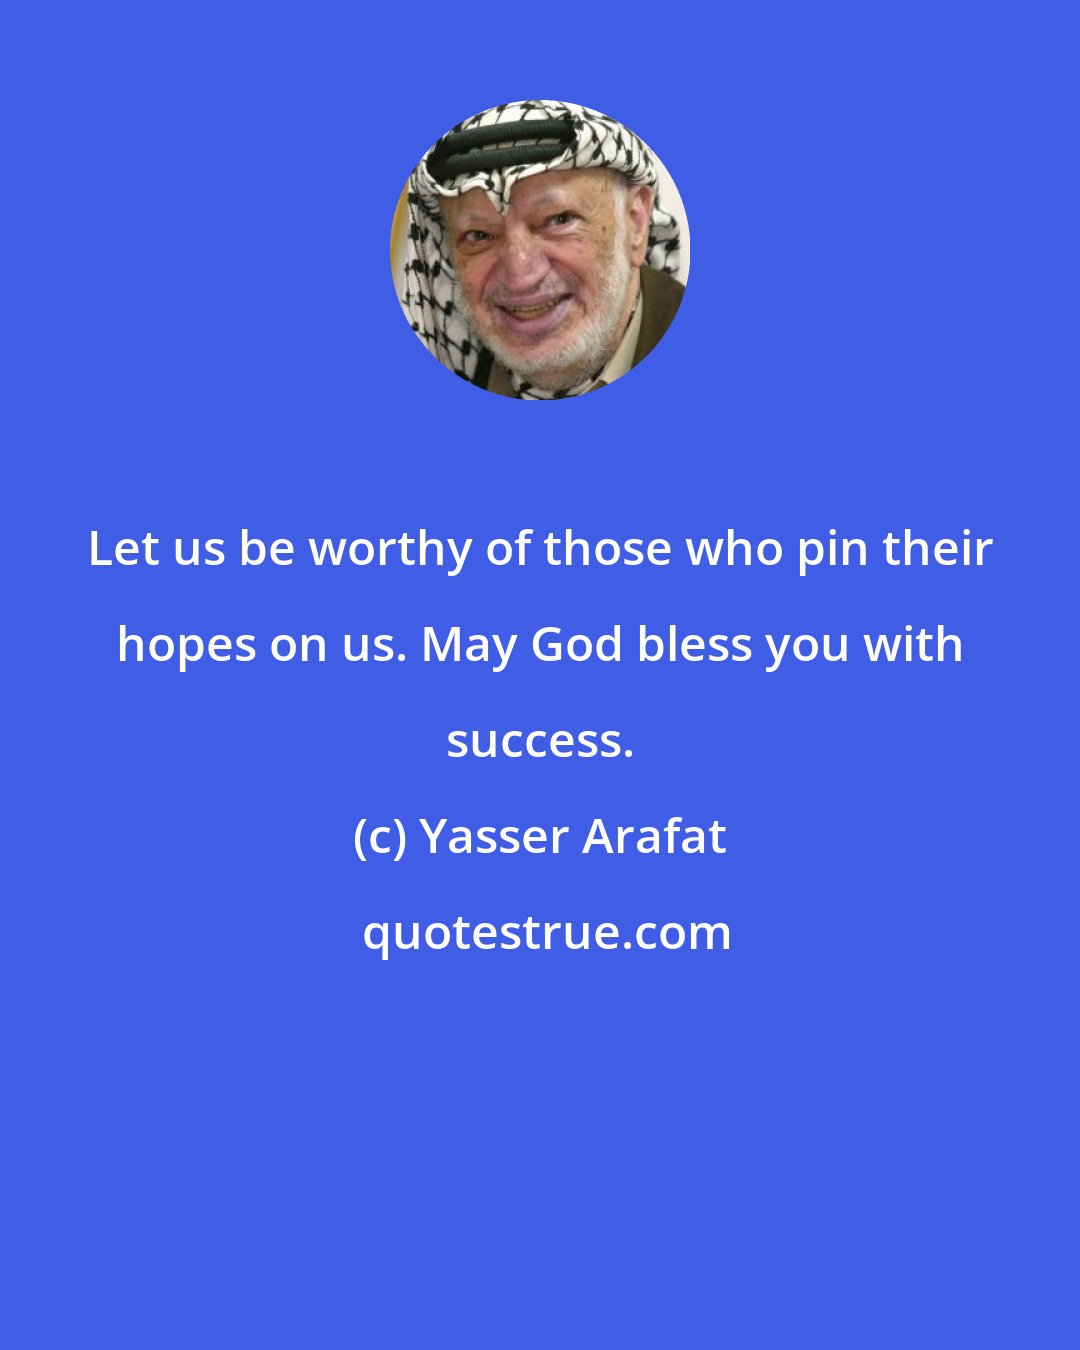 Yasser Arafat: Let us be worthy of those who pin their hopes on us. May God bless you with success.